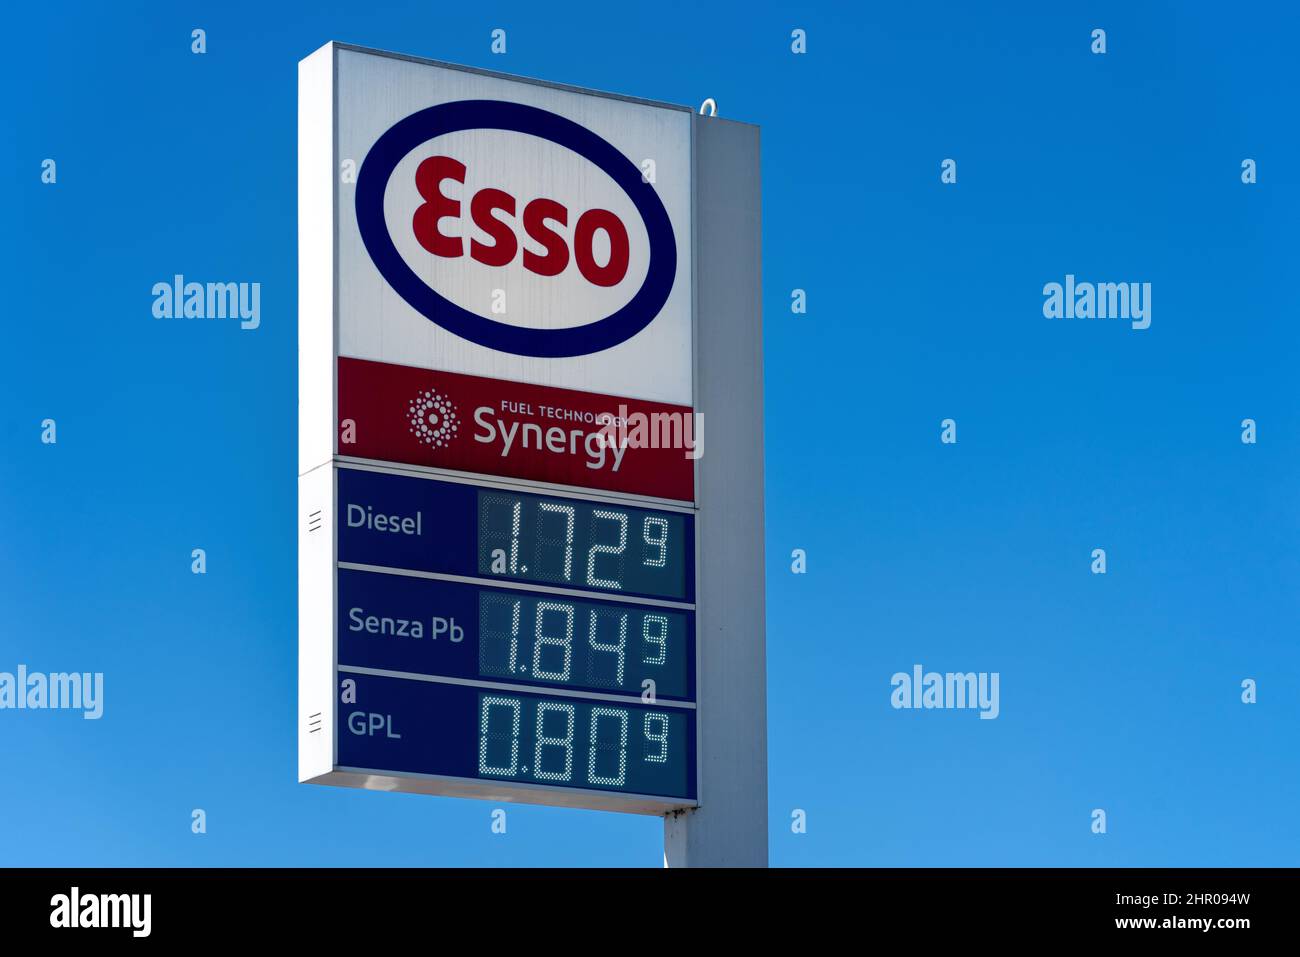 Fossano, Italy - February 22, 2022: Esso logo sign with fuel Euro price display on blue sky, Esso is a brand of the global oil industry giant ExxonMob Stock Photo